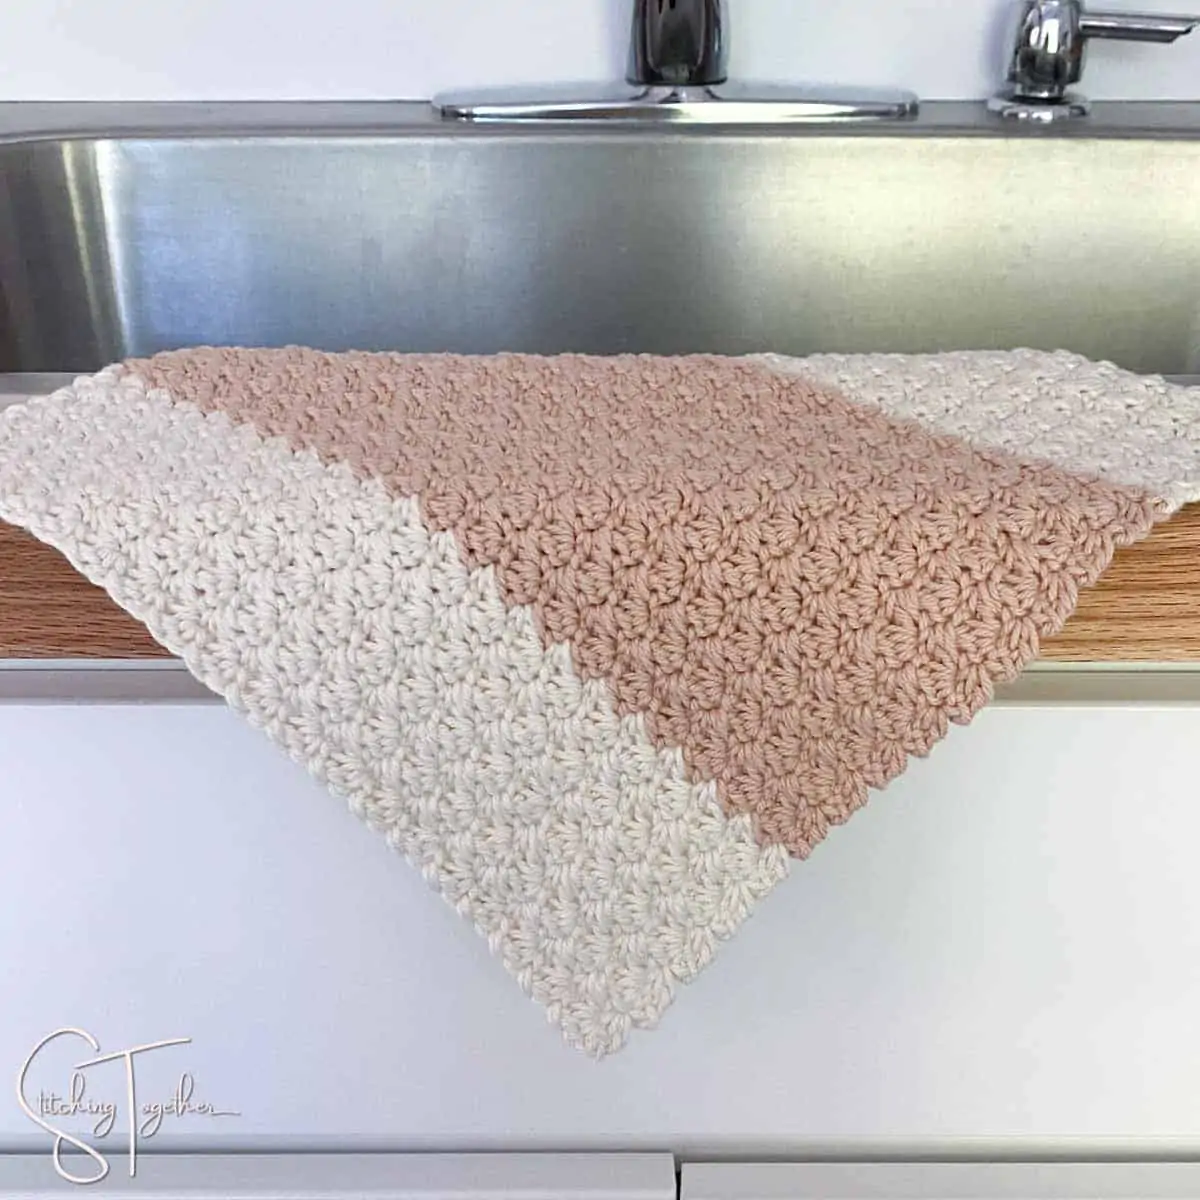 one crochet dishcloth suzette stitch draped on the side of a sink